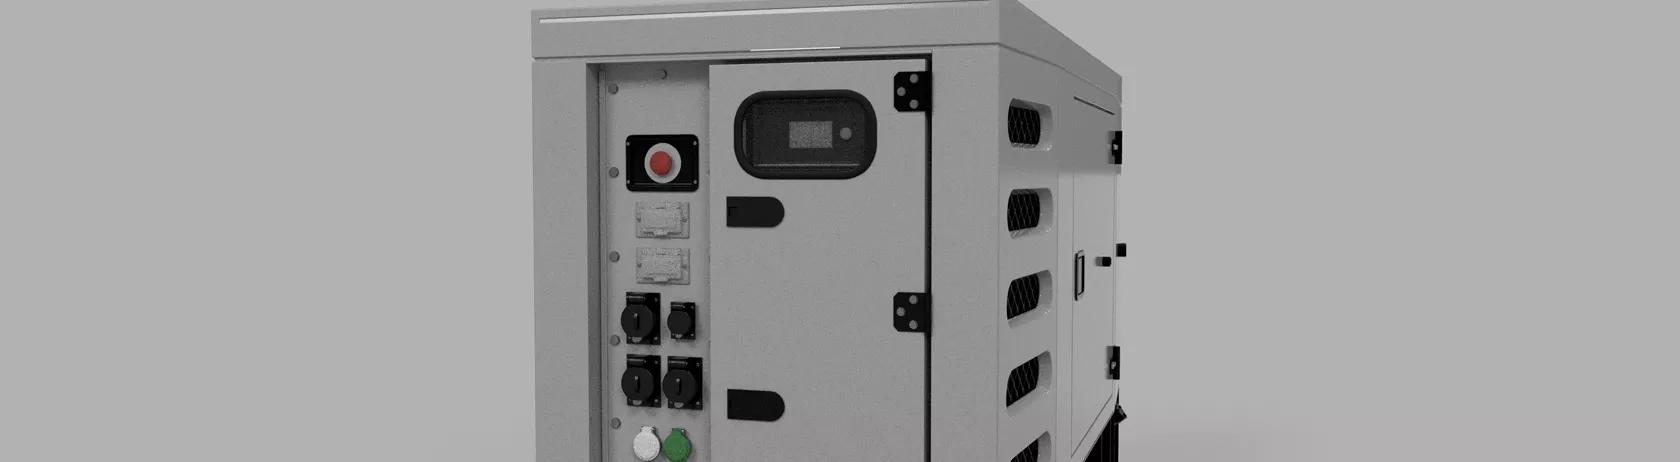 Generator side panel and control panel